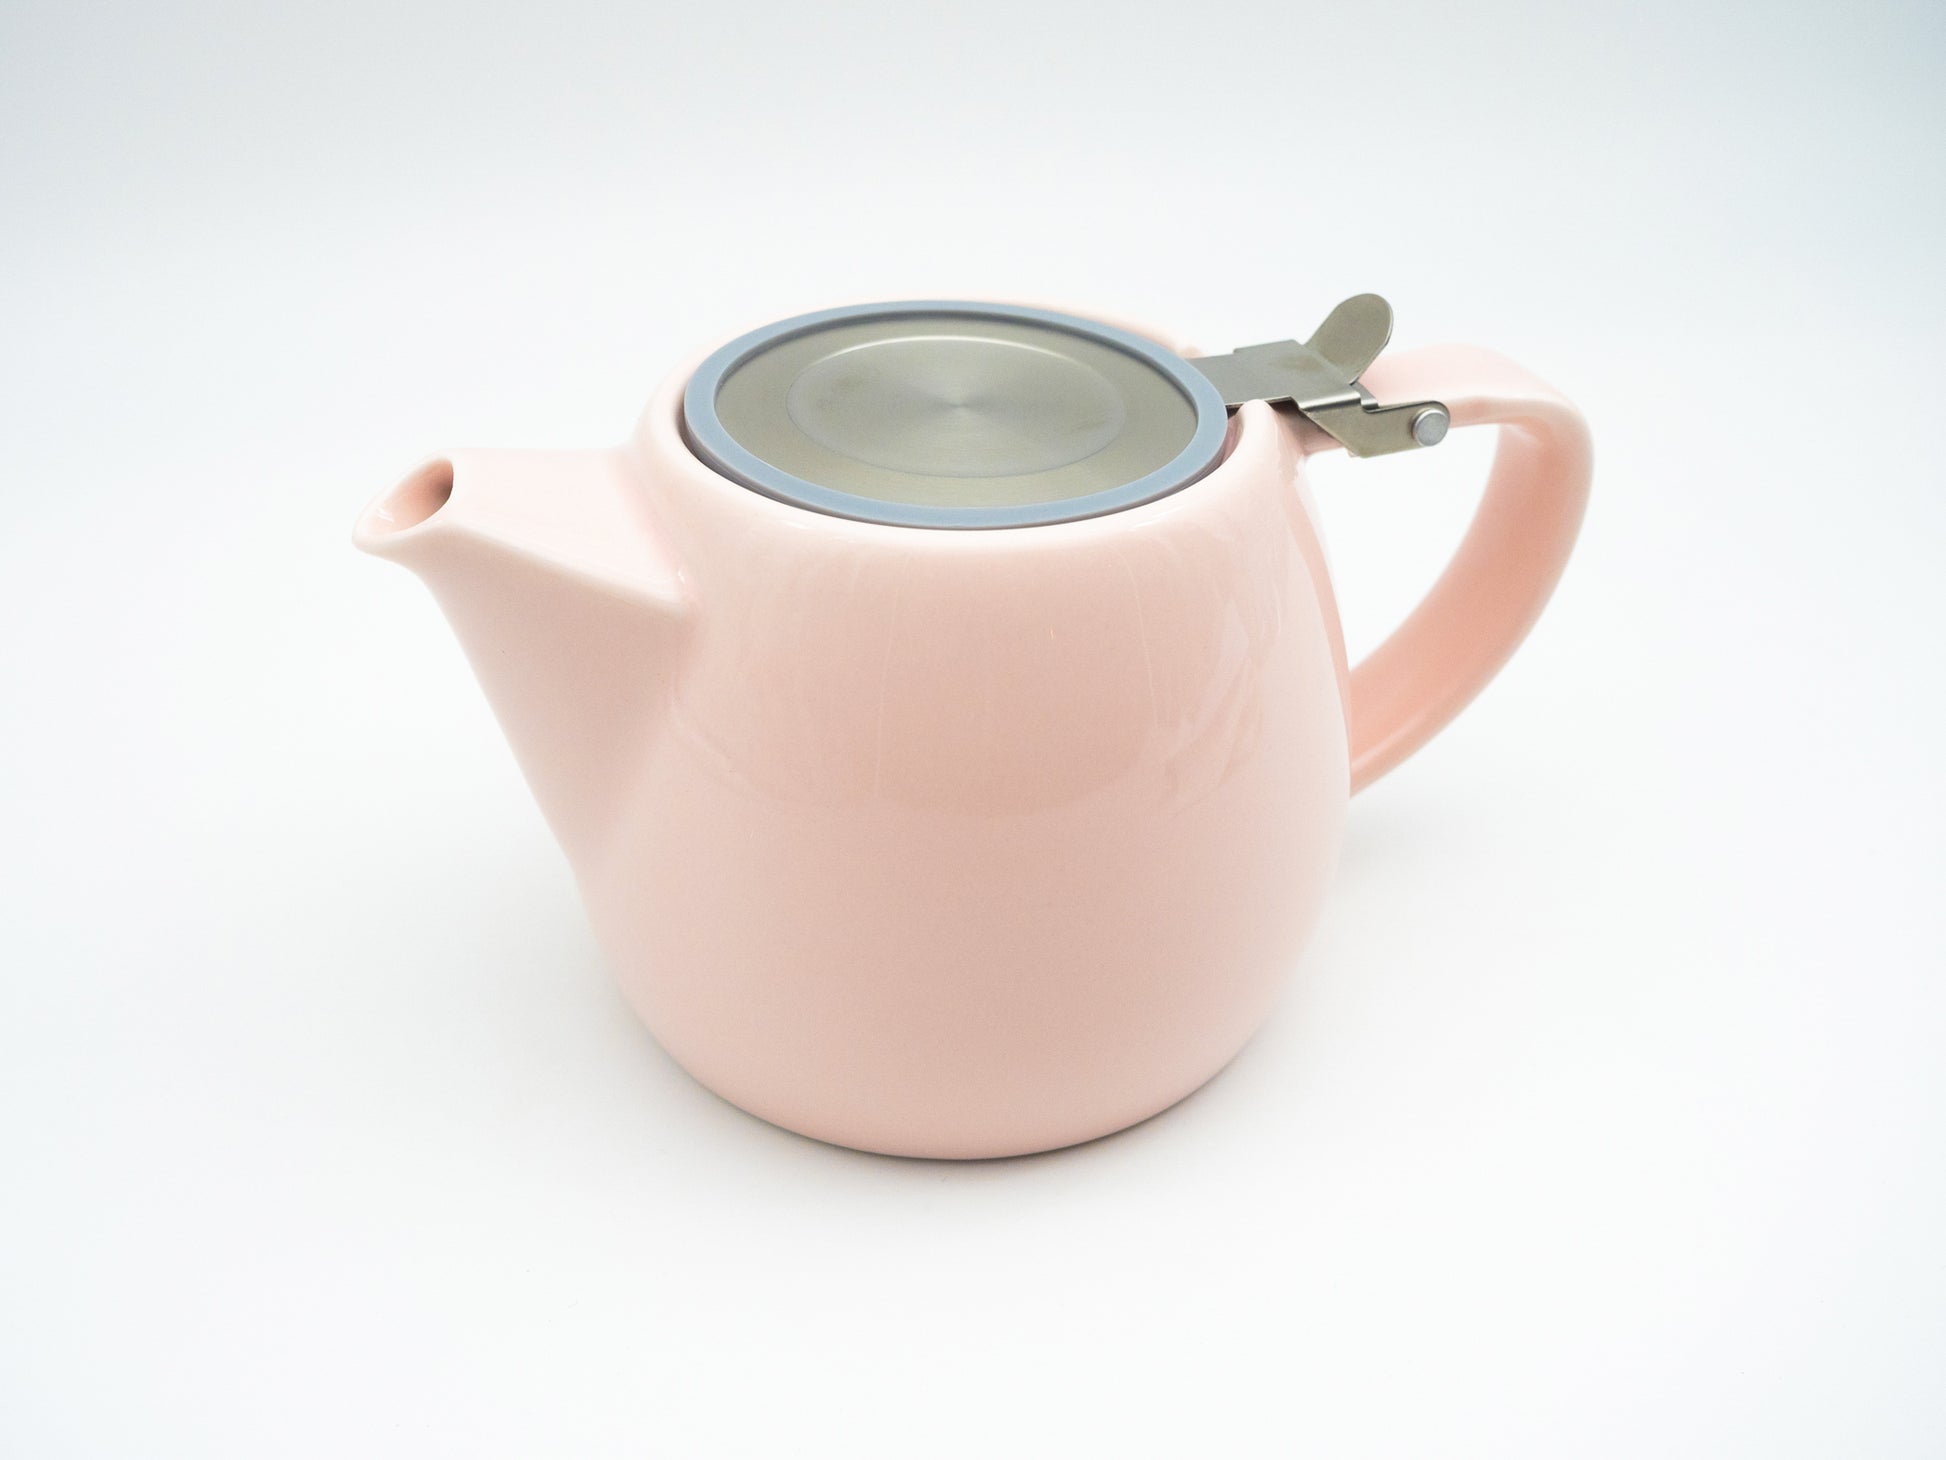 Light pink porcelain tea pot with stainless steel lid and infuser basket